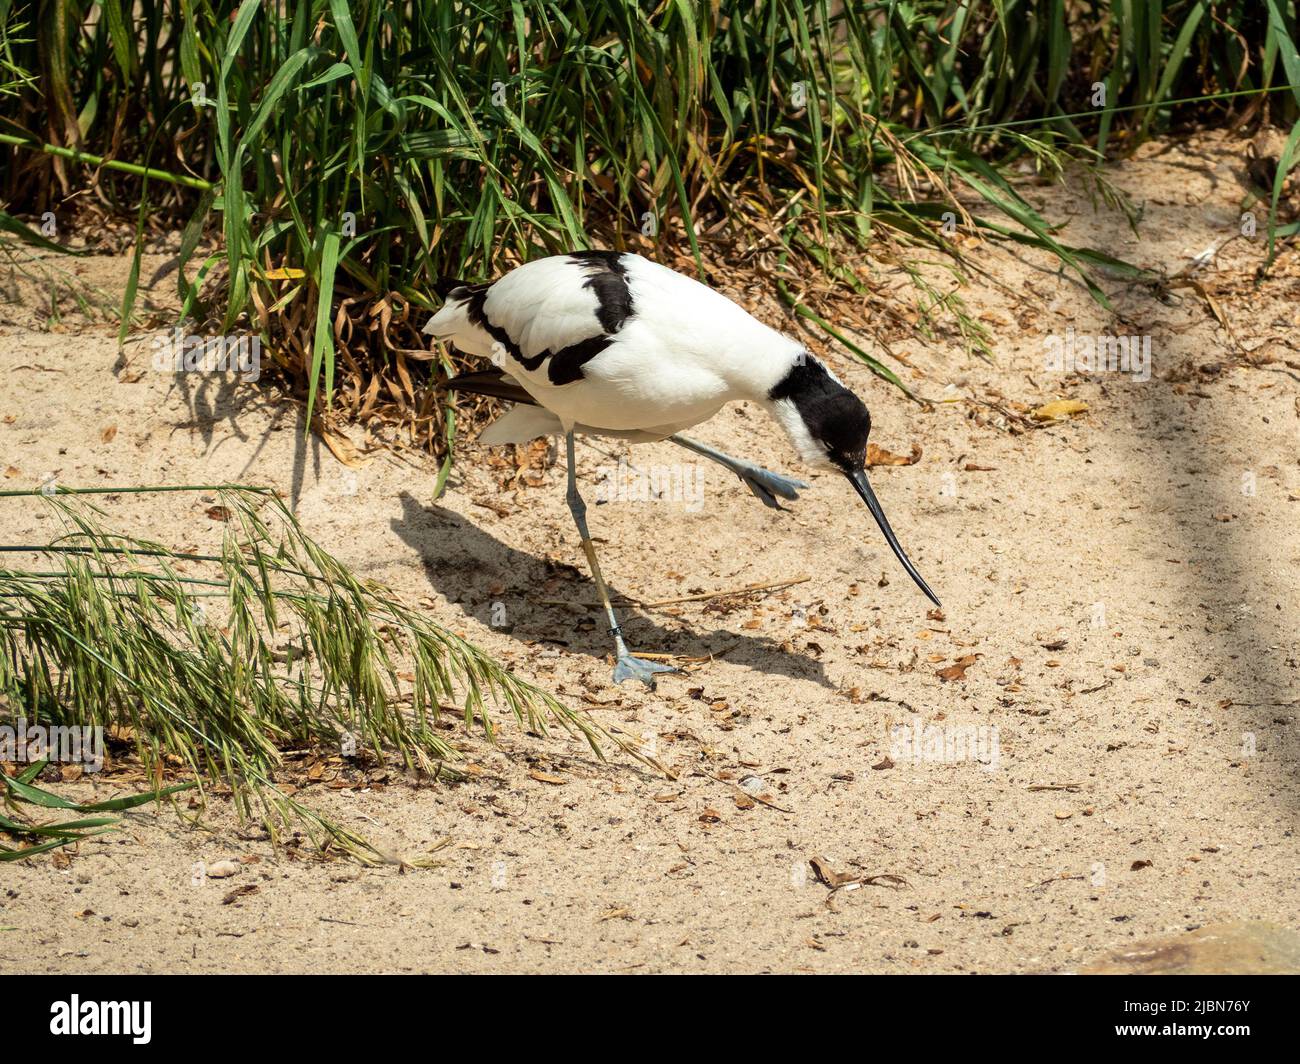 Bird Sandpiper Avocet with a thin long curved beak. Bird on the shore near the water. Stock Photo